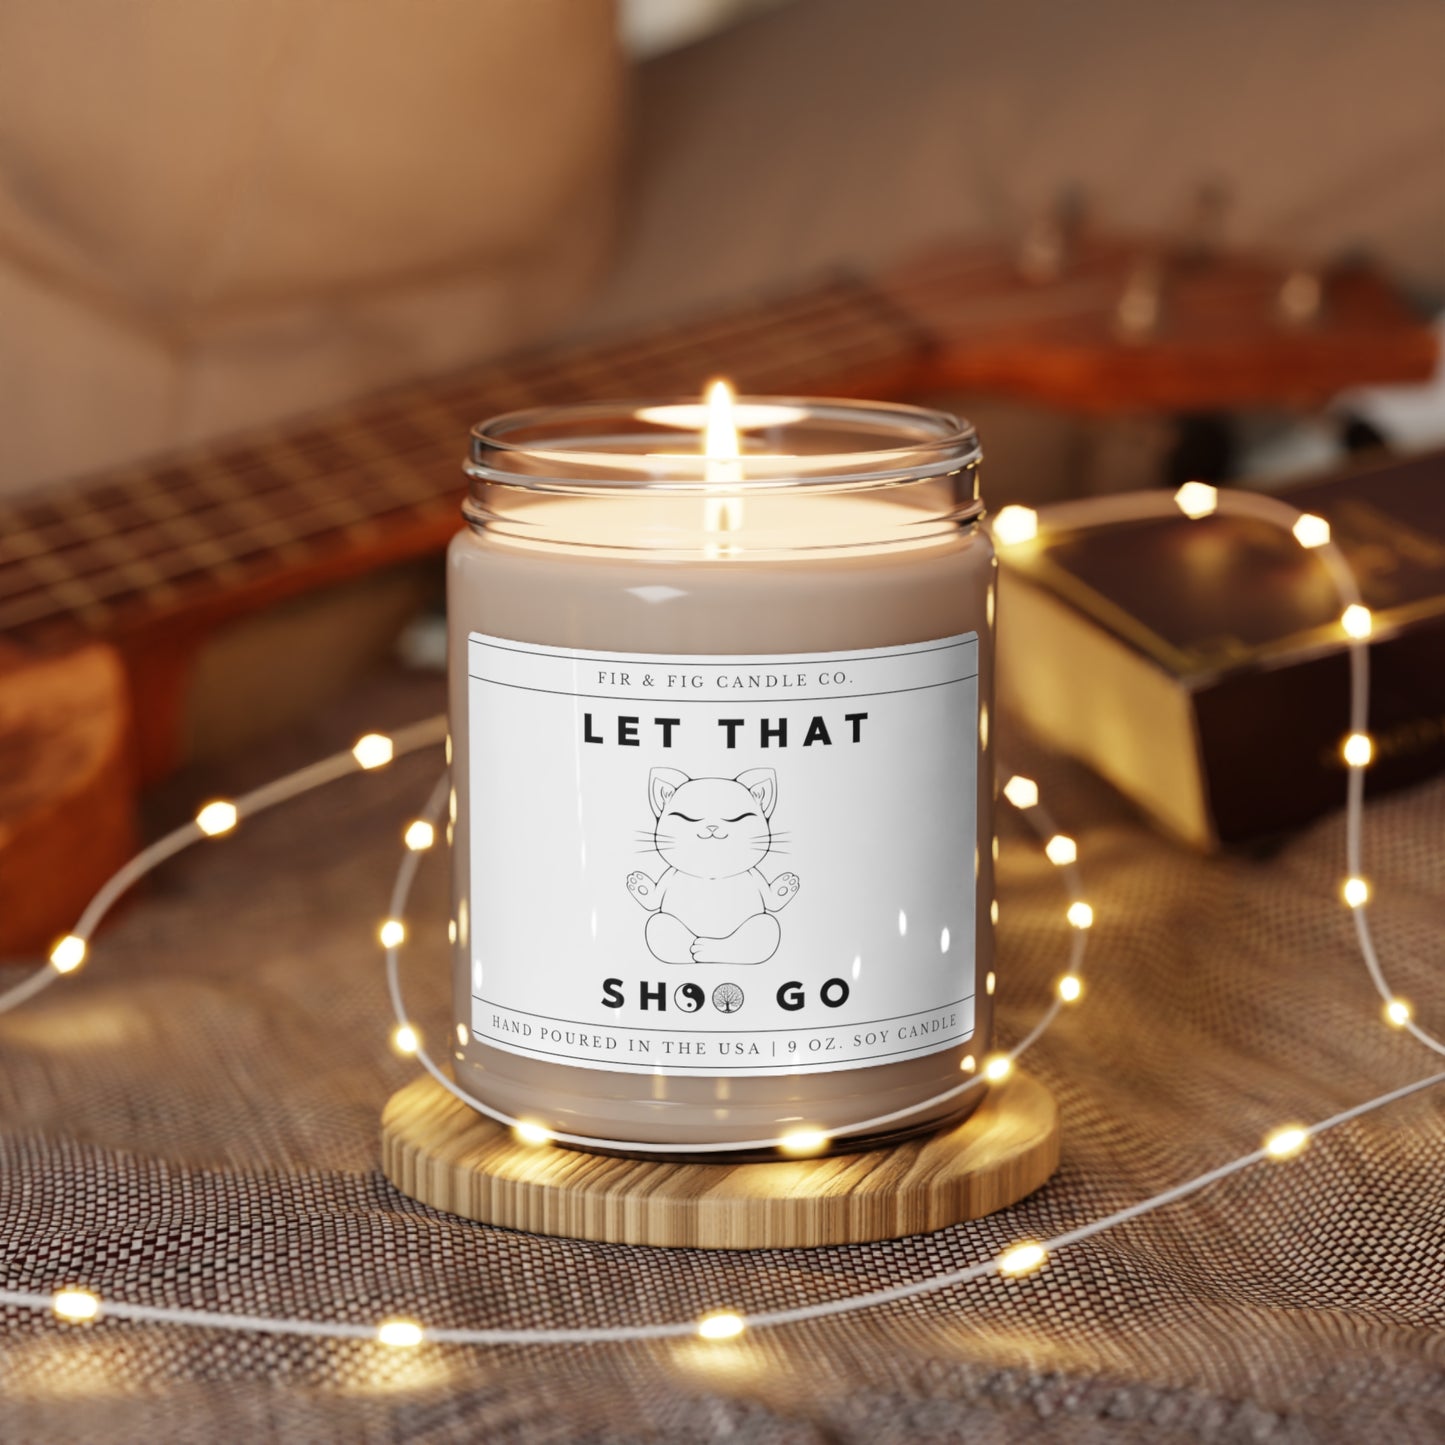 Let That SH*! Go 100% Eco-Friendly 9oz Soy Candle, Funny Candle Gift, Gift for Him, Gift for Her, Gift for Mom, Zen Cat Decor, Cat Lovers, Eco-Friendly Fragrance, Humorous Home Decor, Gift for Cat Lovers, Relaxation with a Twist